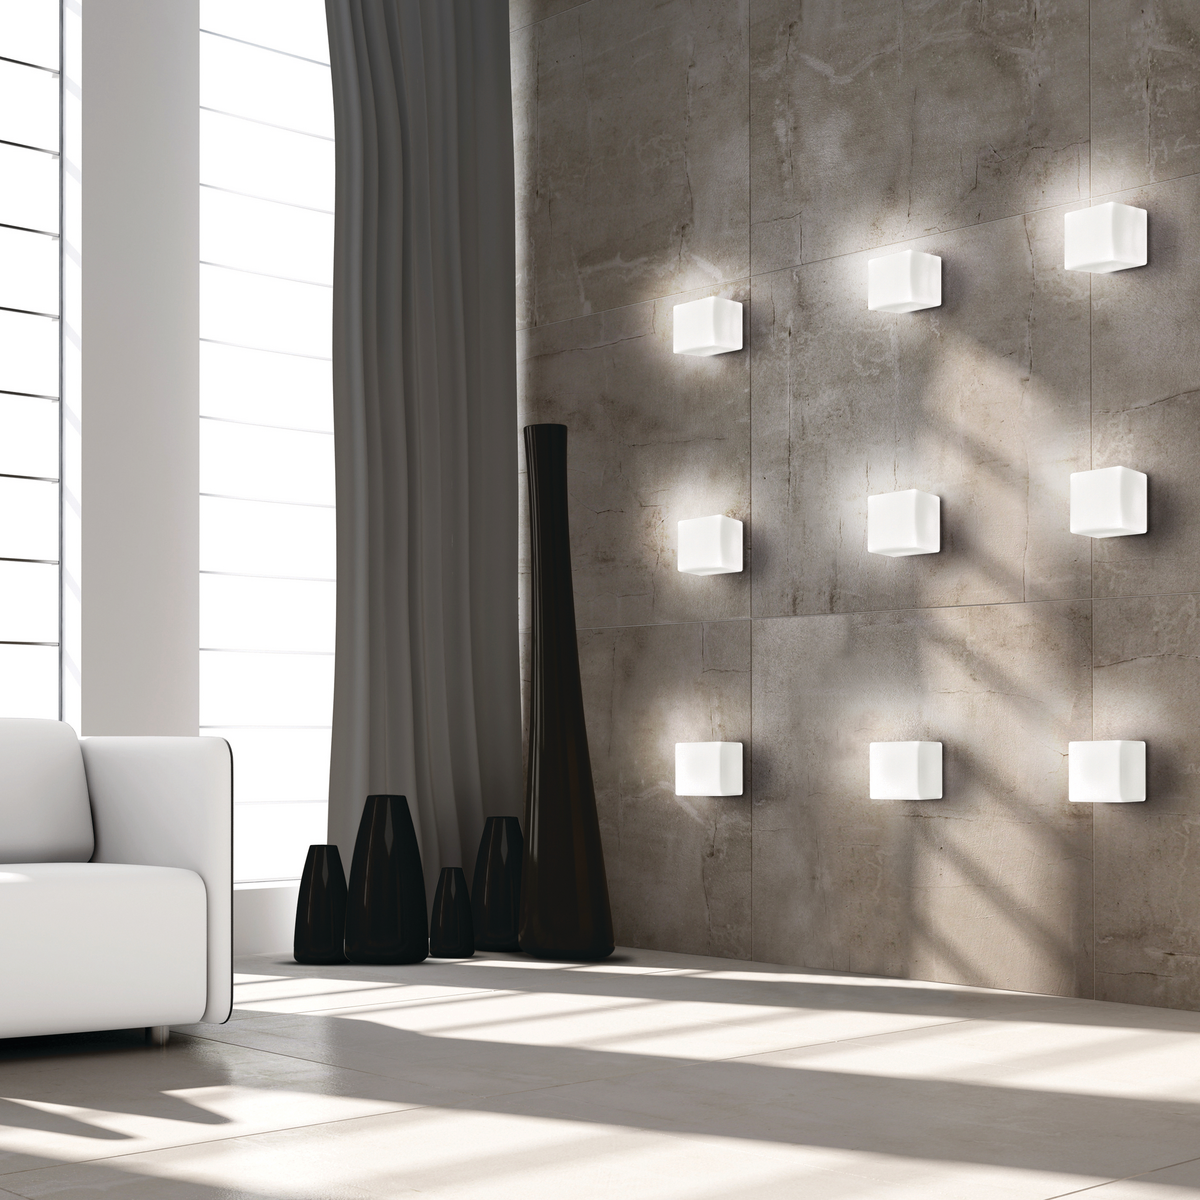 Cubic wall lights arranged in large square against modern wall in minimalist room